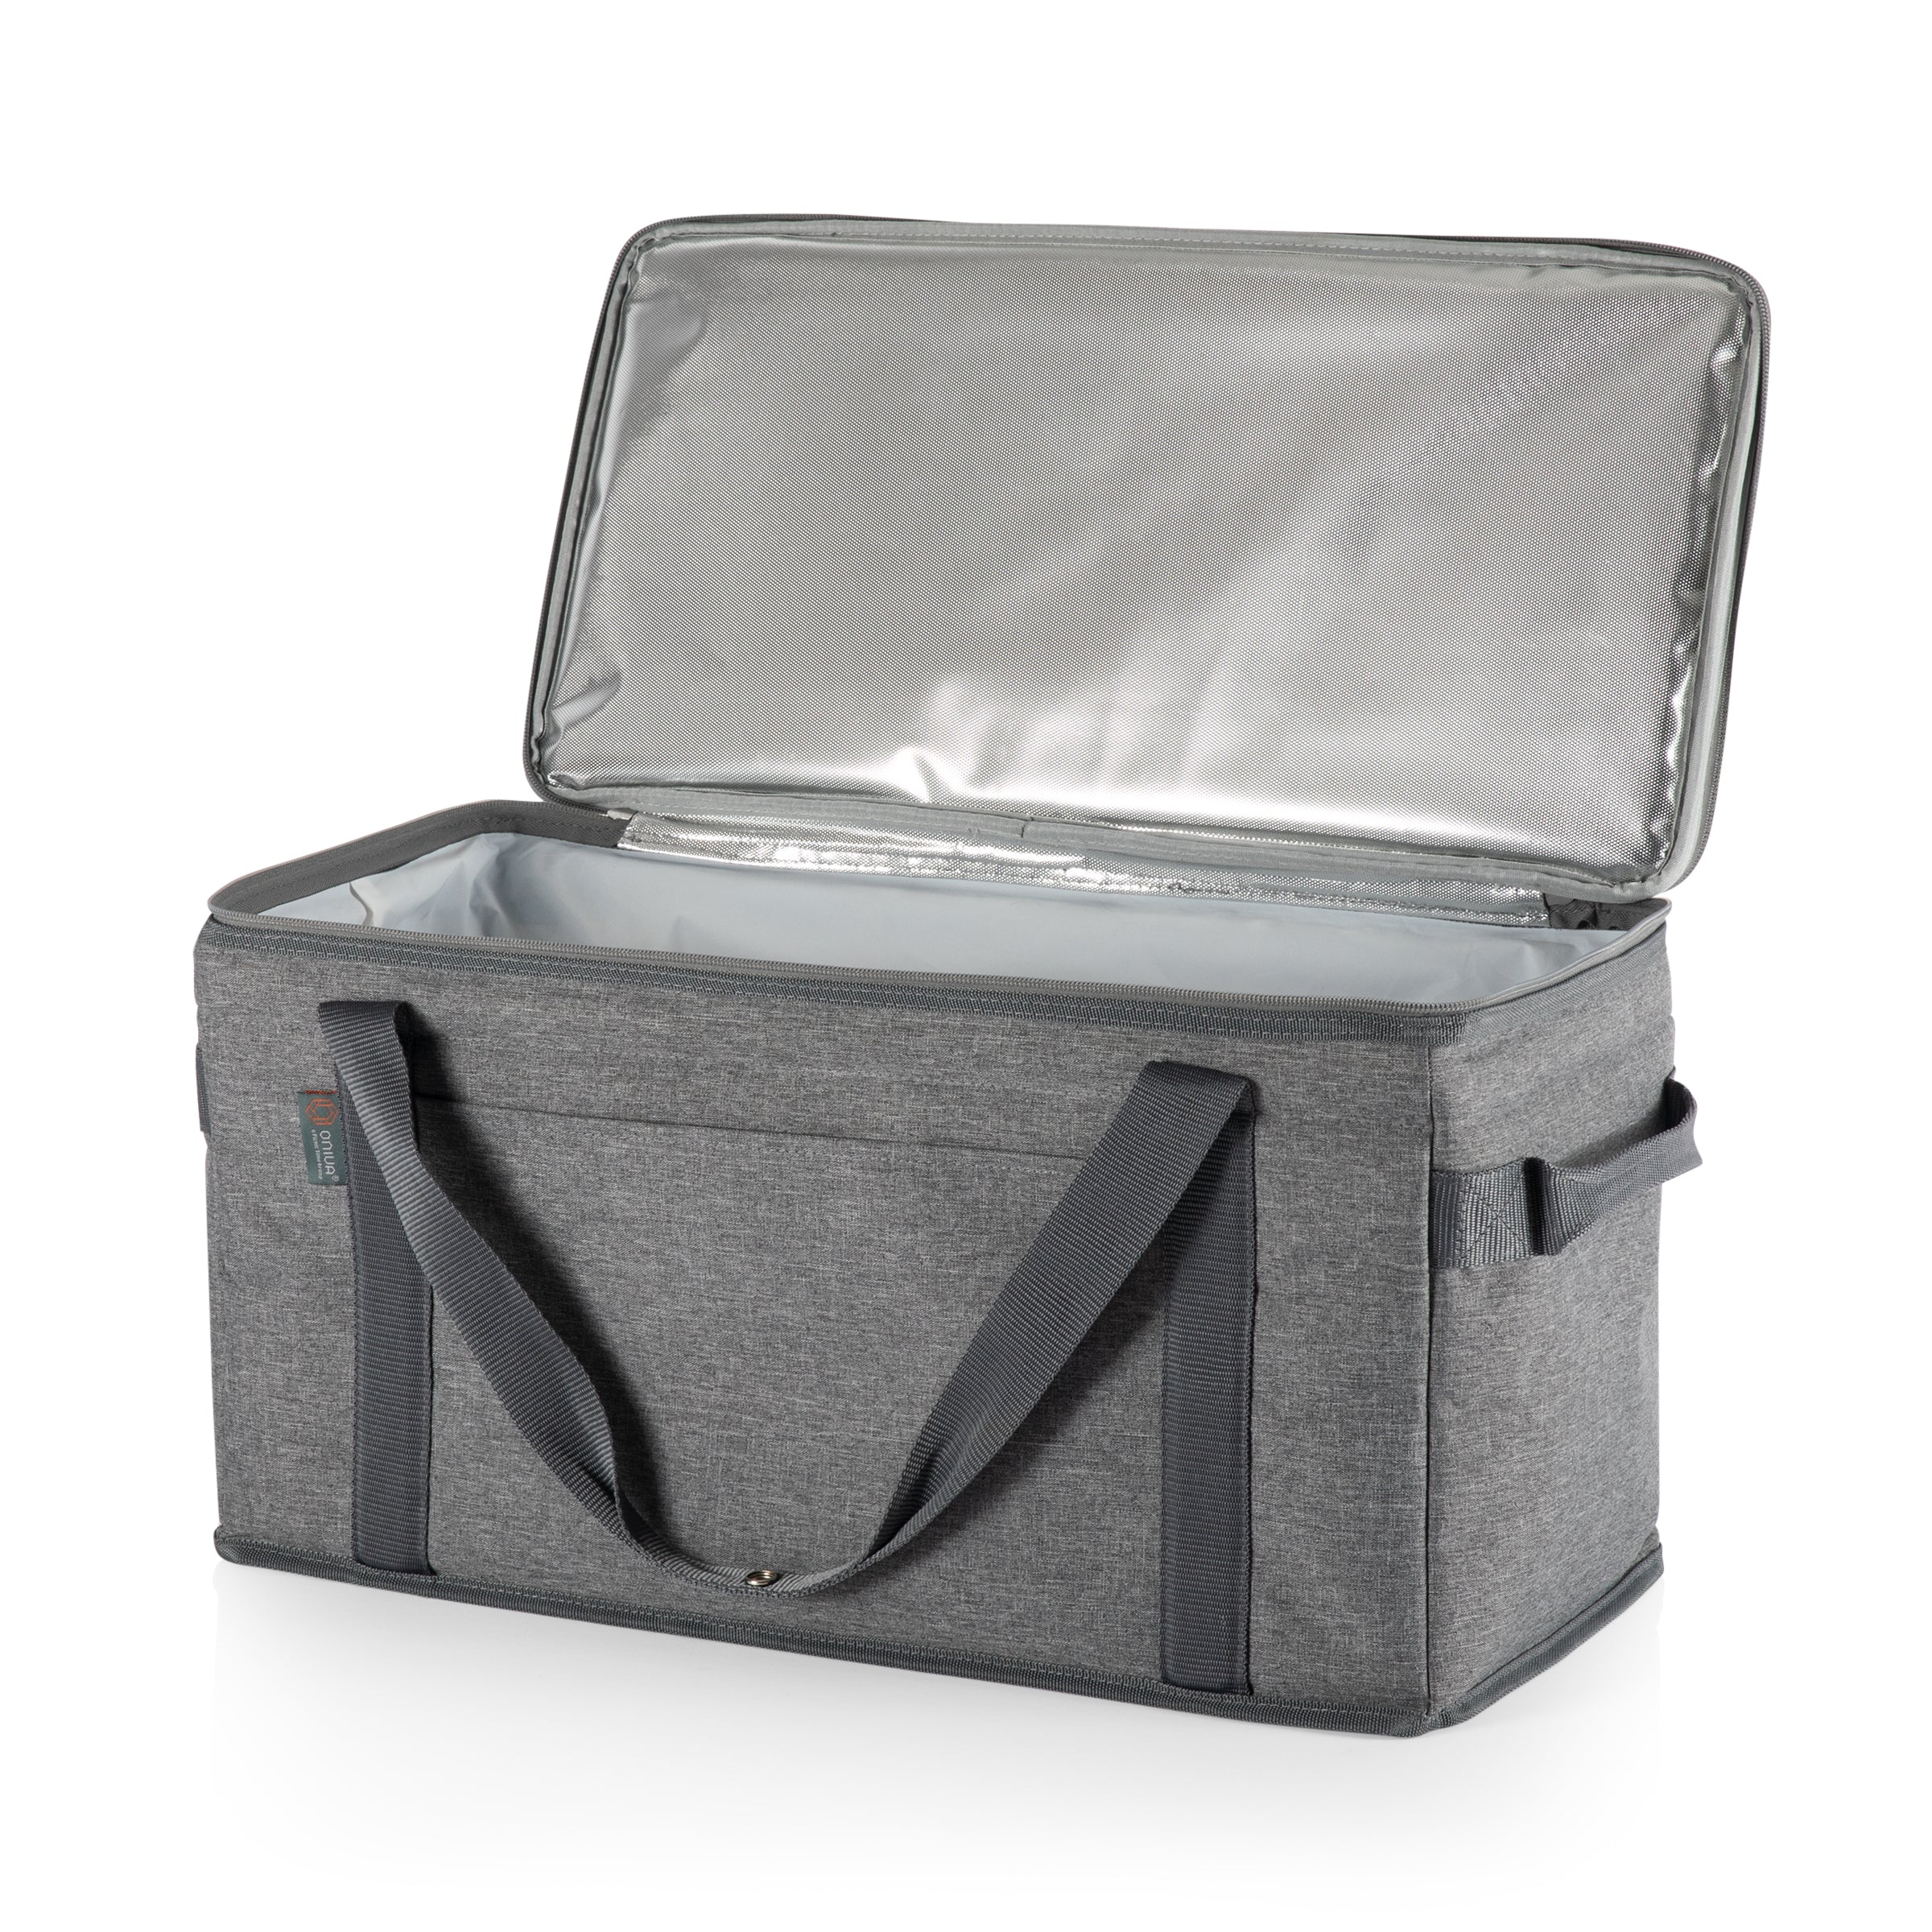 Colorado Avalanche - 64 Can Collapsible Cooler